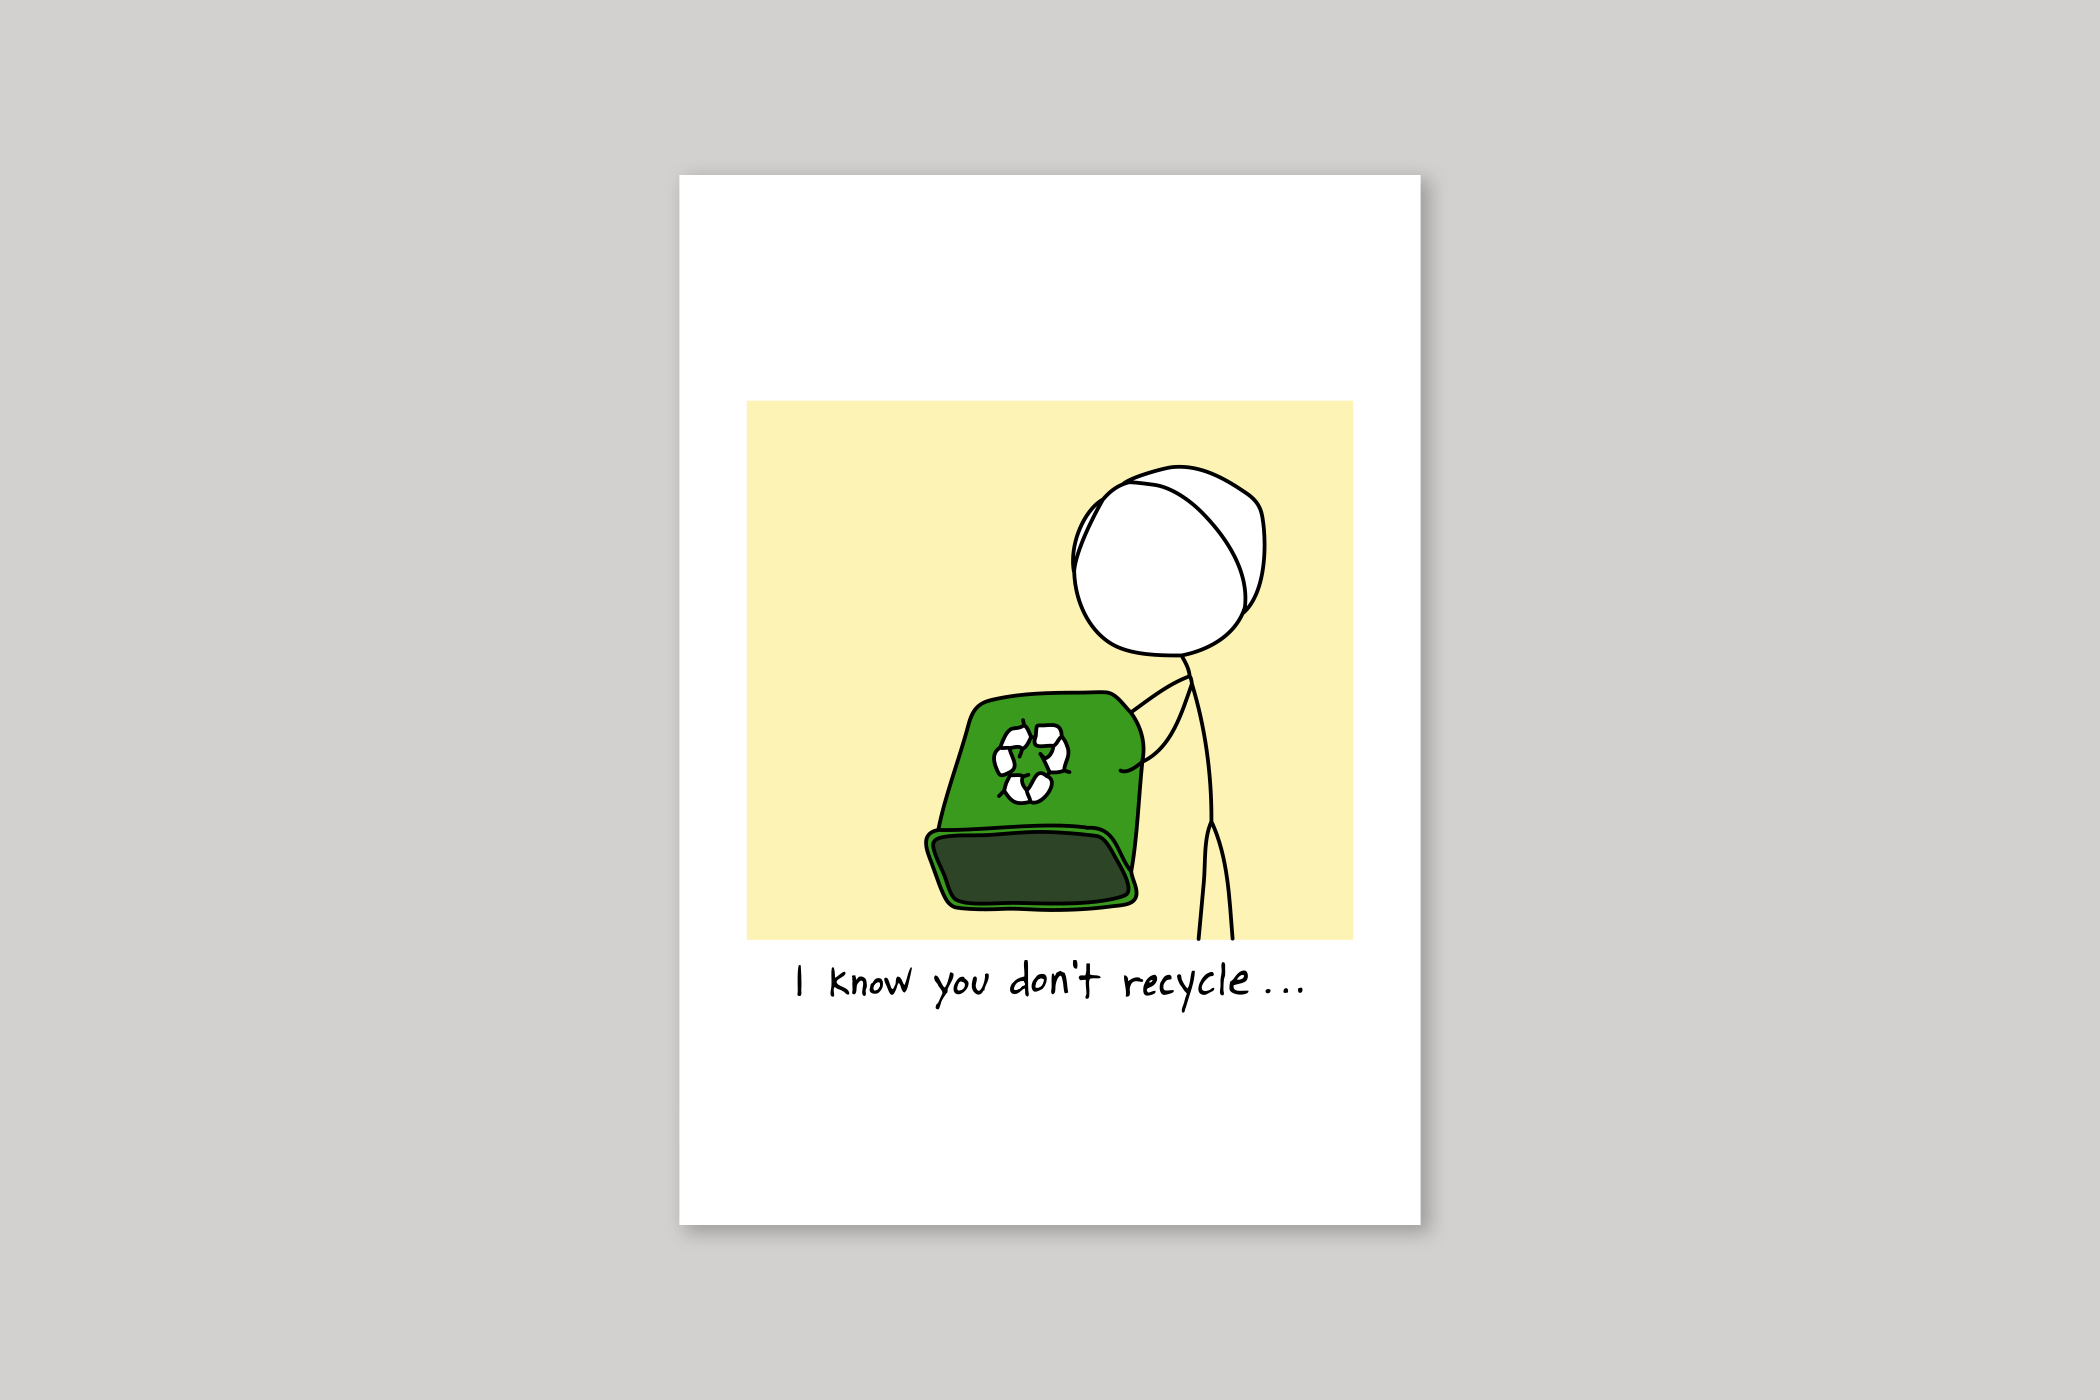 You Don't Recycle humorous illustration from Mean Cards range of greeting cards by Icon.